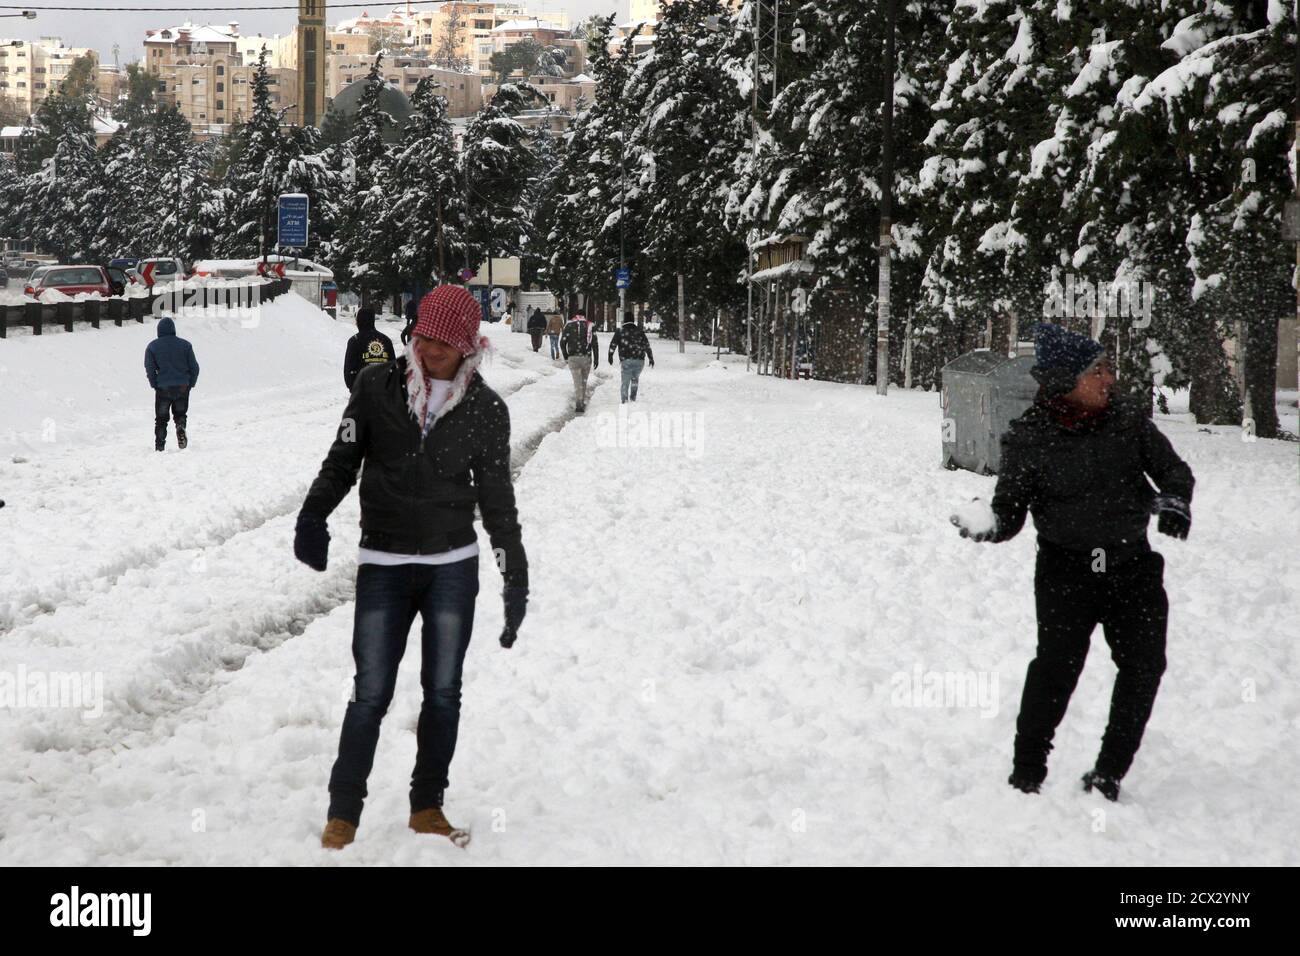 People play with snow after a heavy snowstorm in Amman December 13, 2013. A powerful winter storm sweeping the eastern Mediterranean this week is causing mayhem across the The storm, named